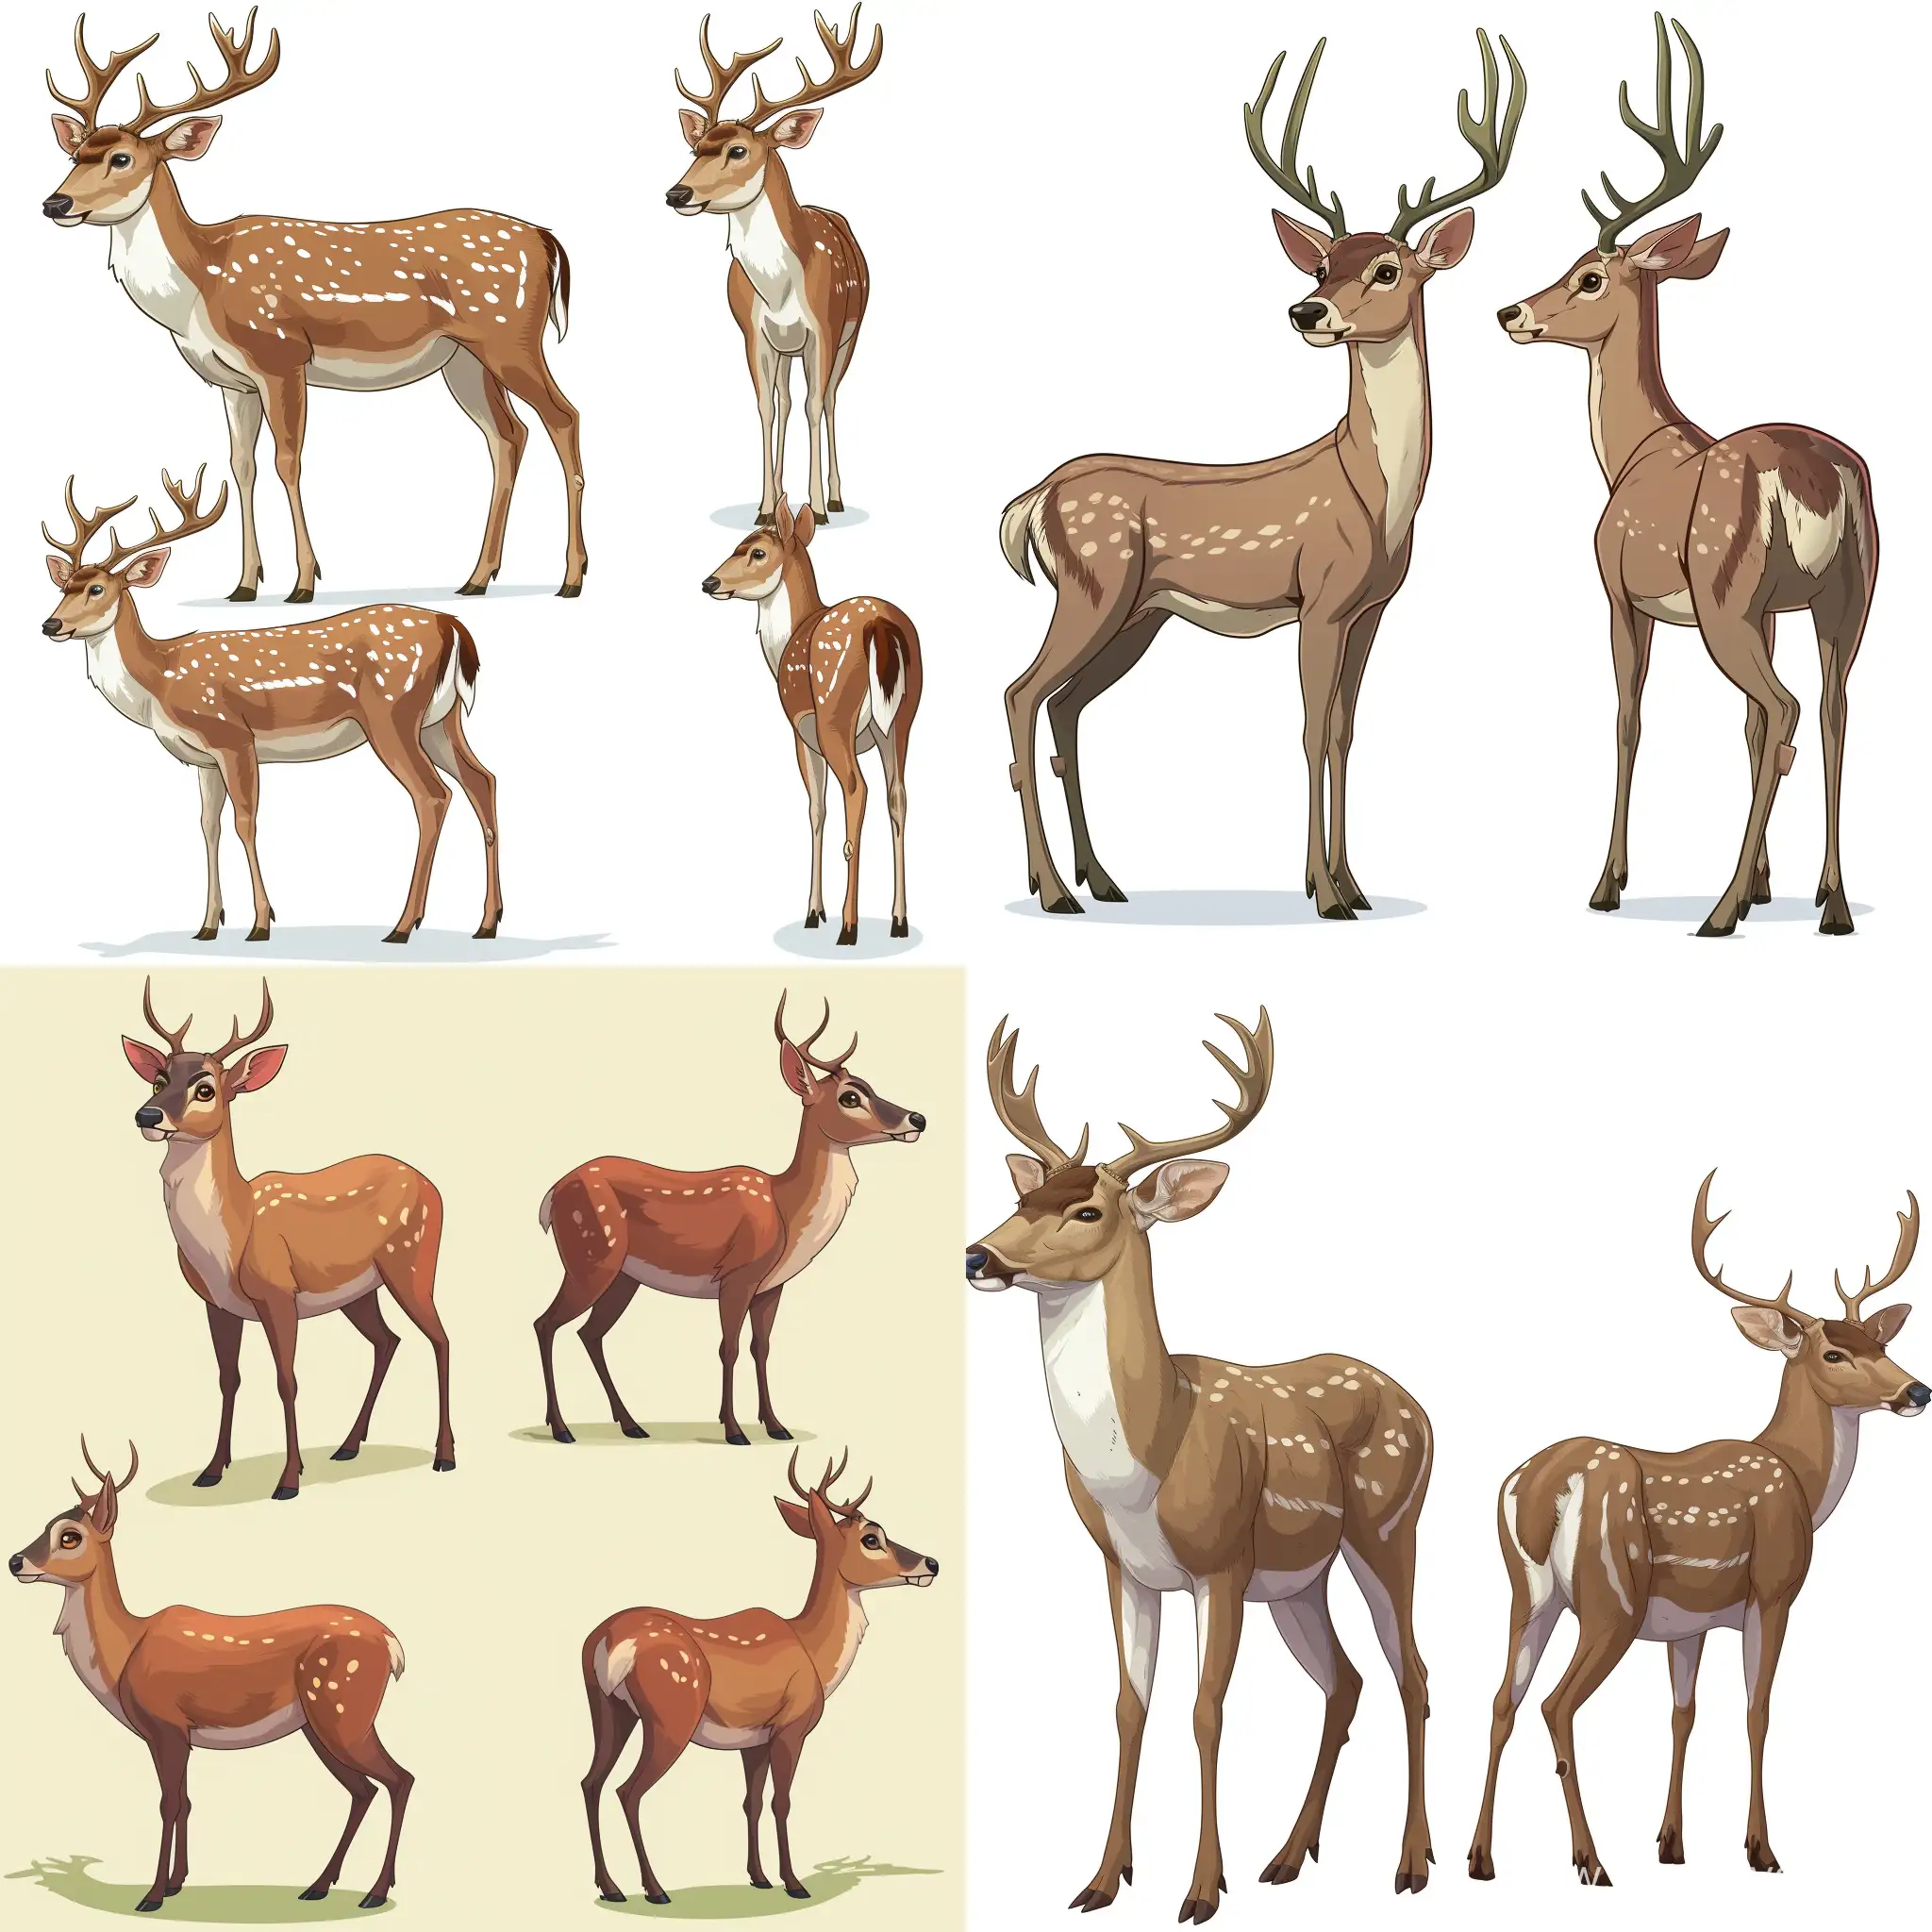 northern deer, side view, front view, detailed coat, Unrealistic style, cartoon